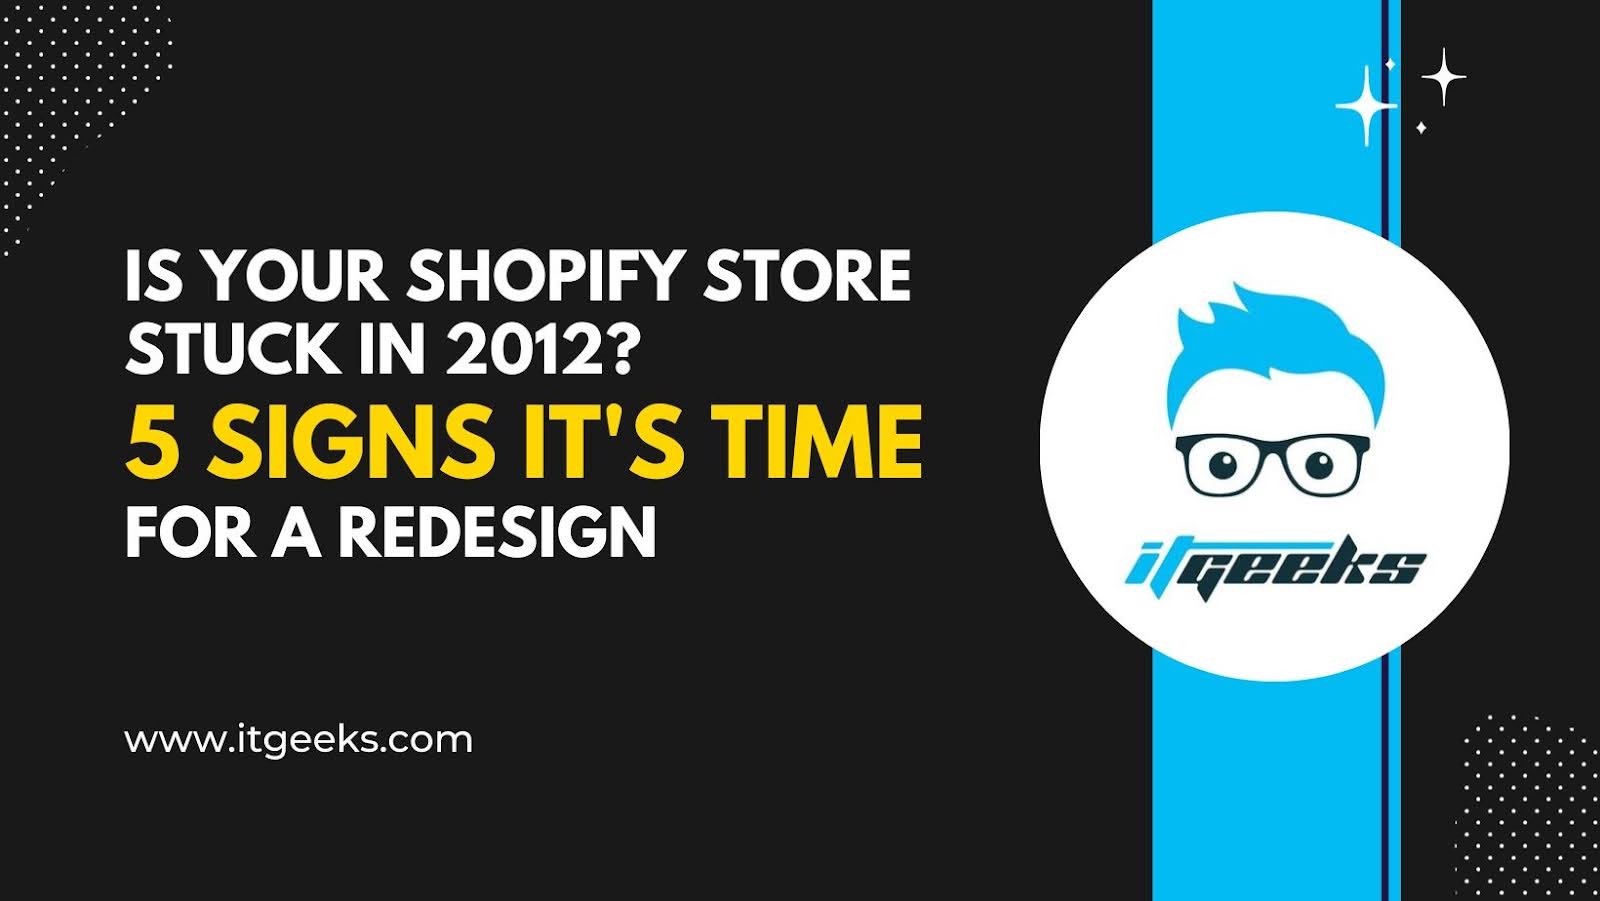 Is Your Shopify Store Stuck in 2012? 5 Signs It's Time for a Redesign